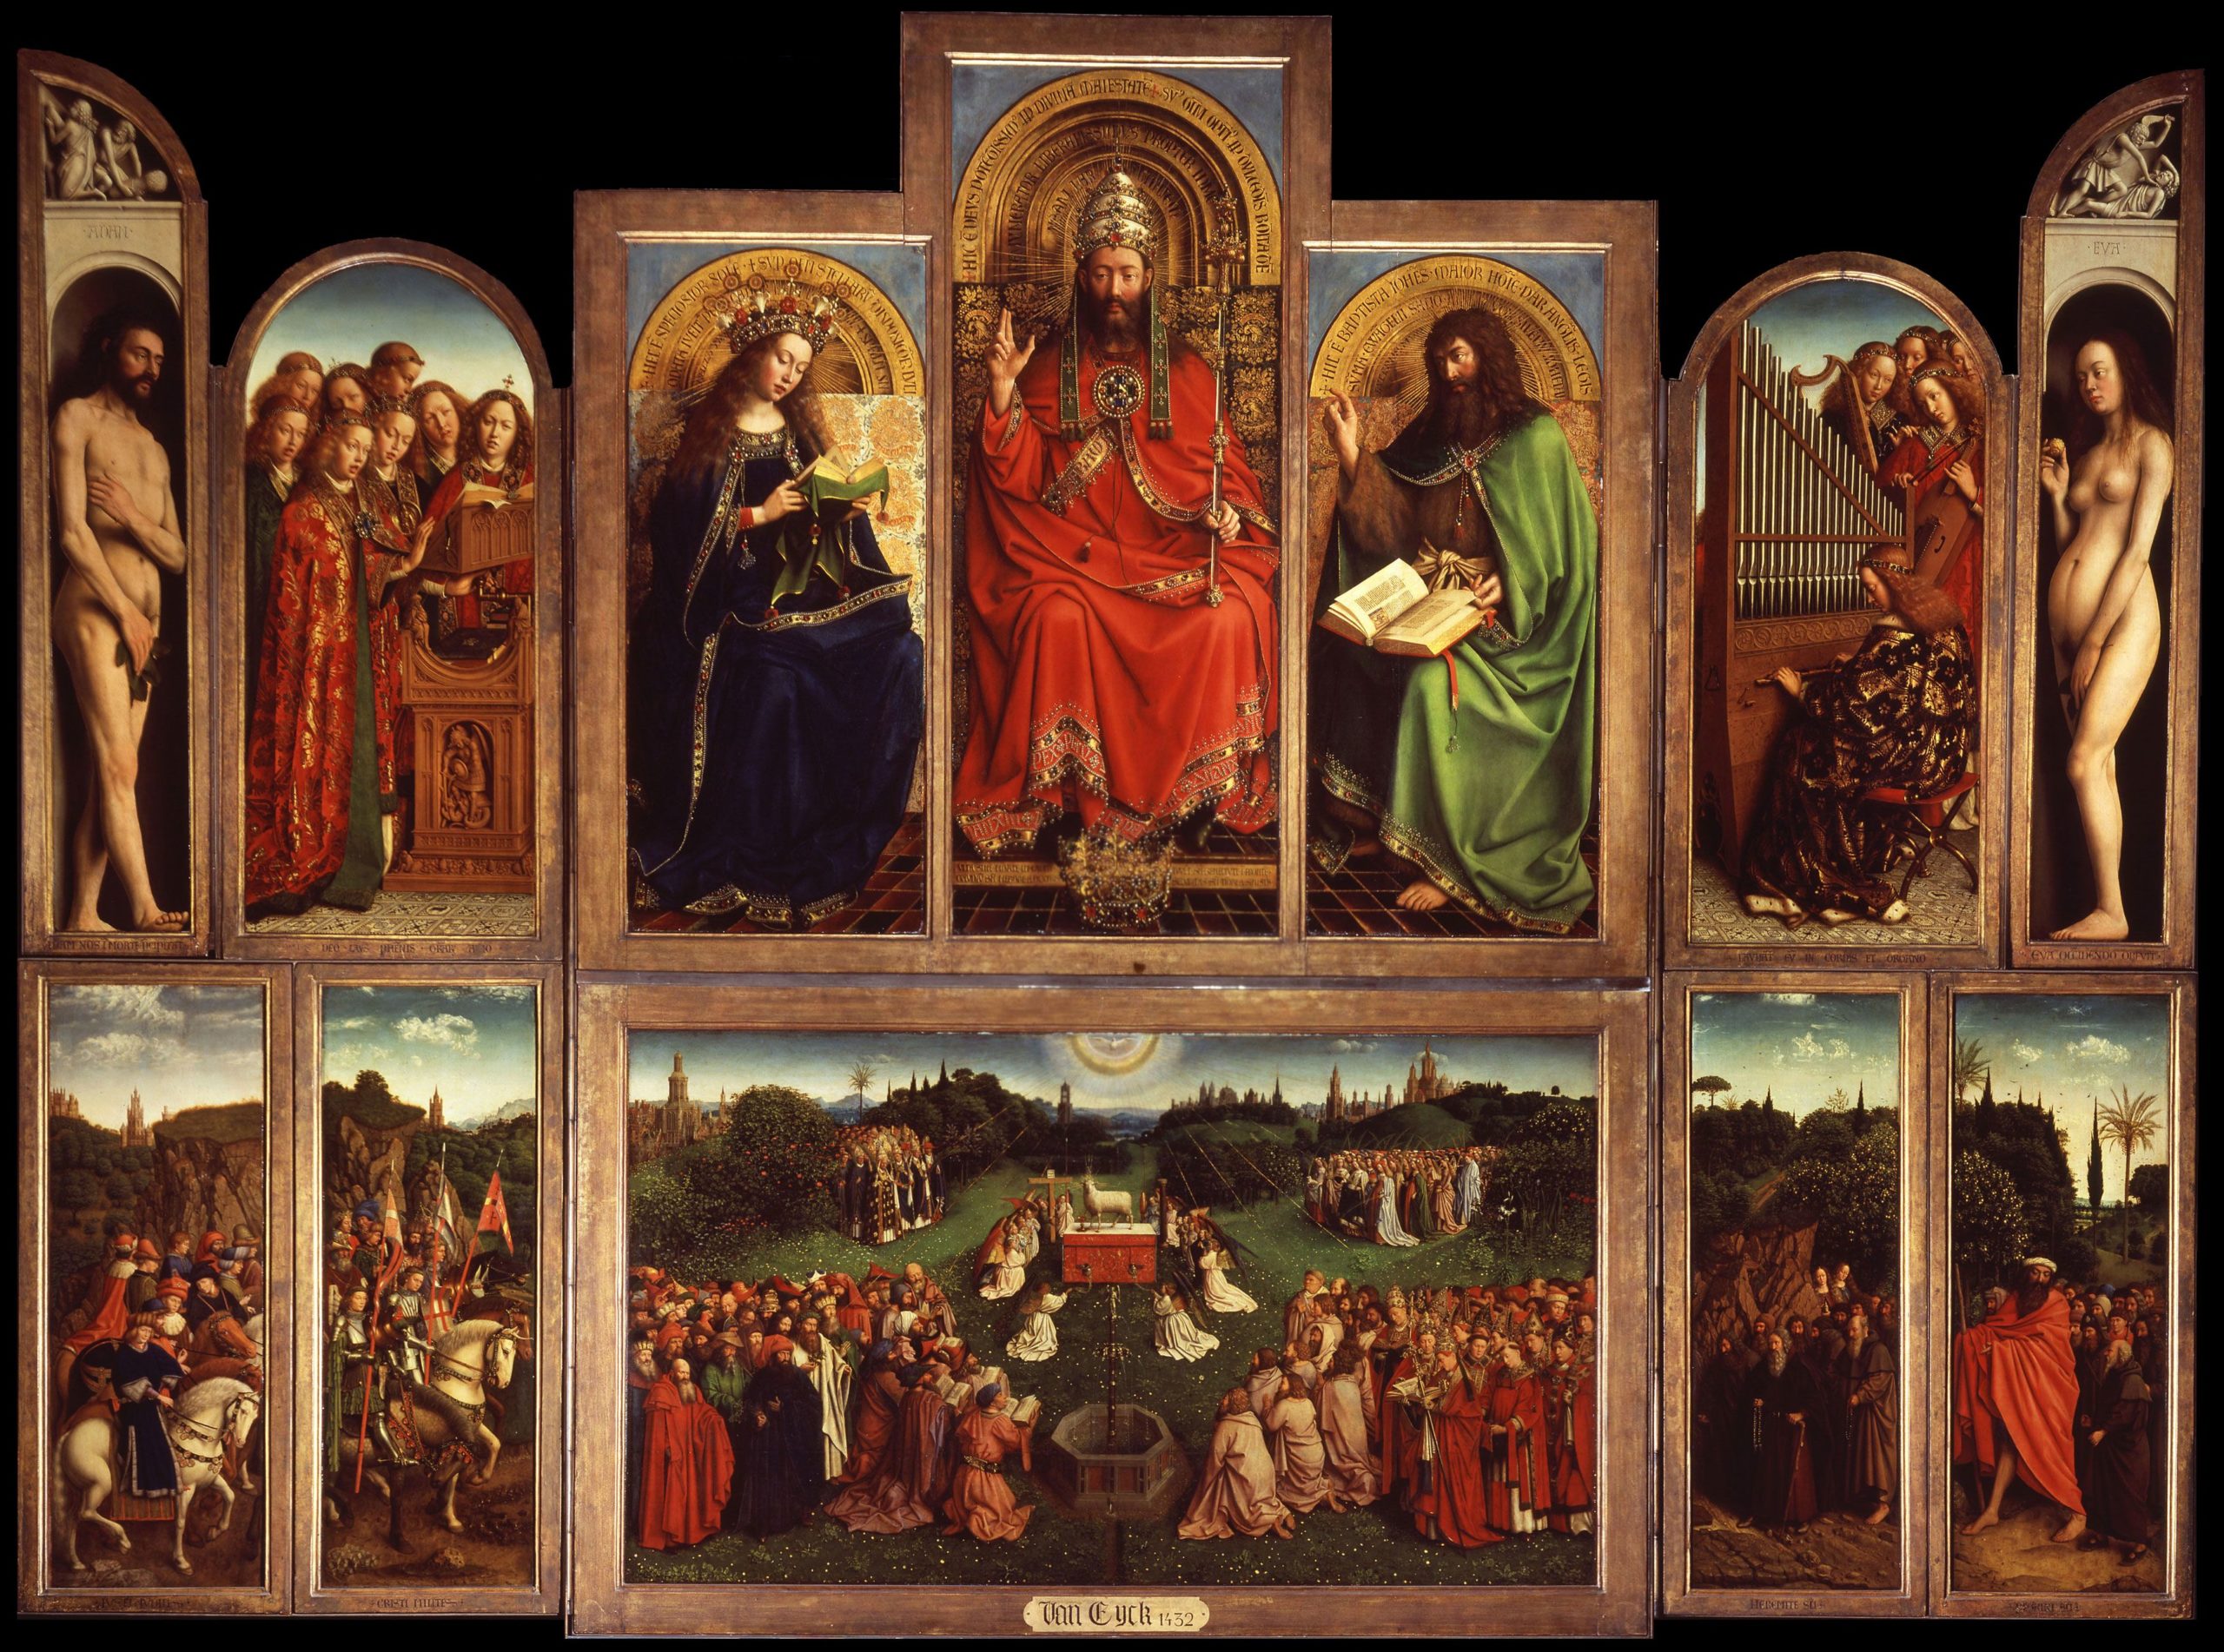 THE TEMPTATION OF REALITY – The Mystic Lamb of the Van Eyck brothers